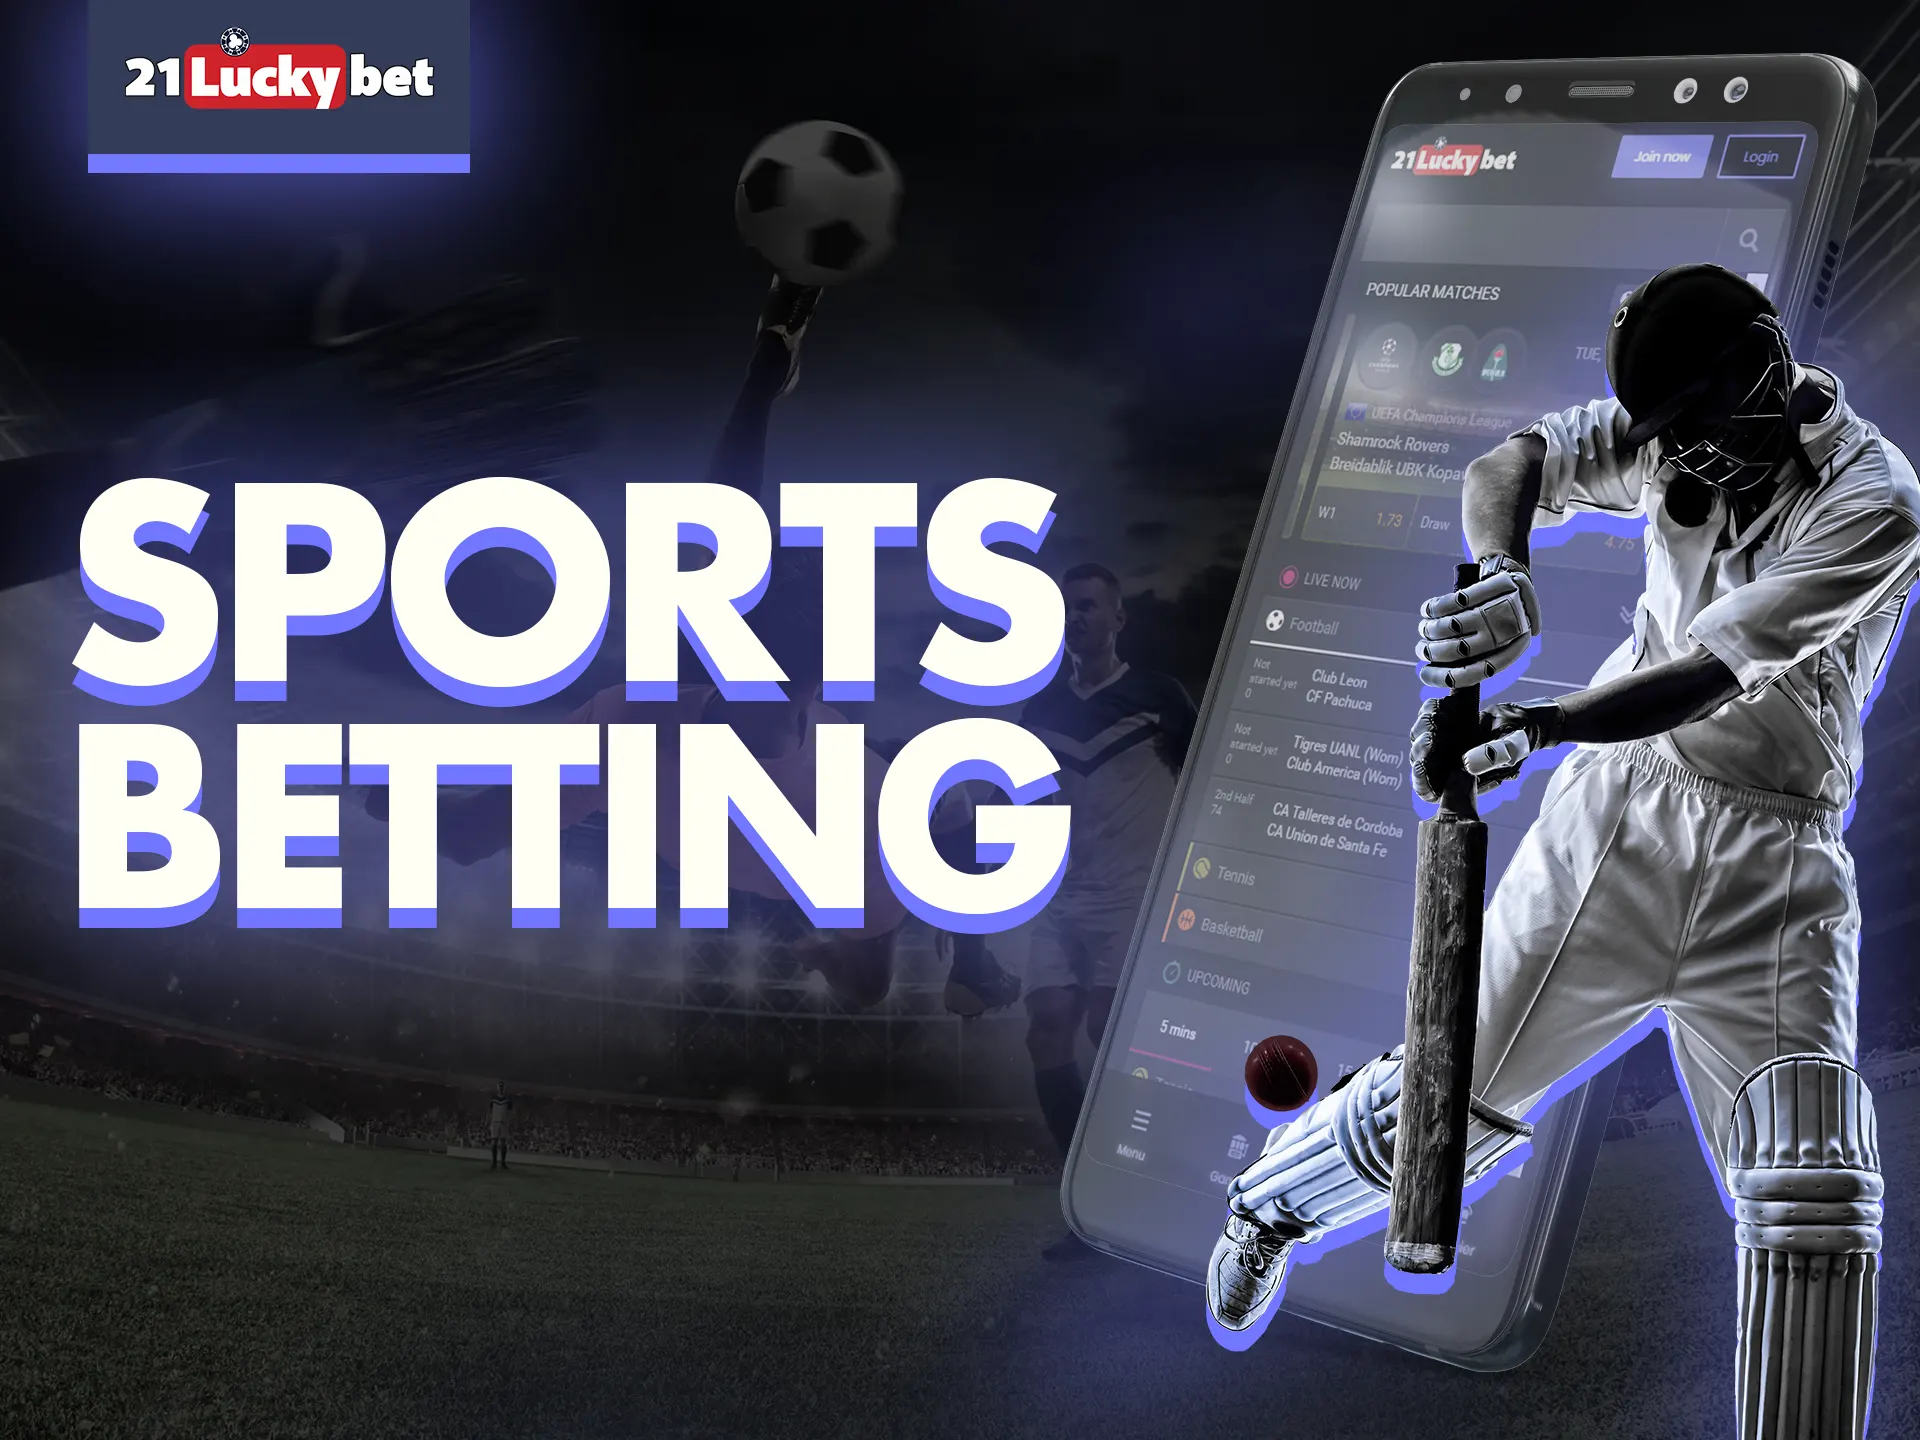 You have access to betting on various sports with 21luckybet app.